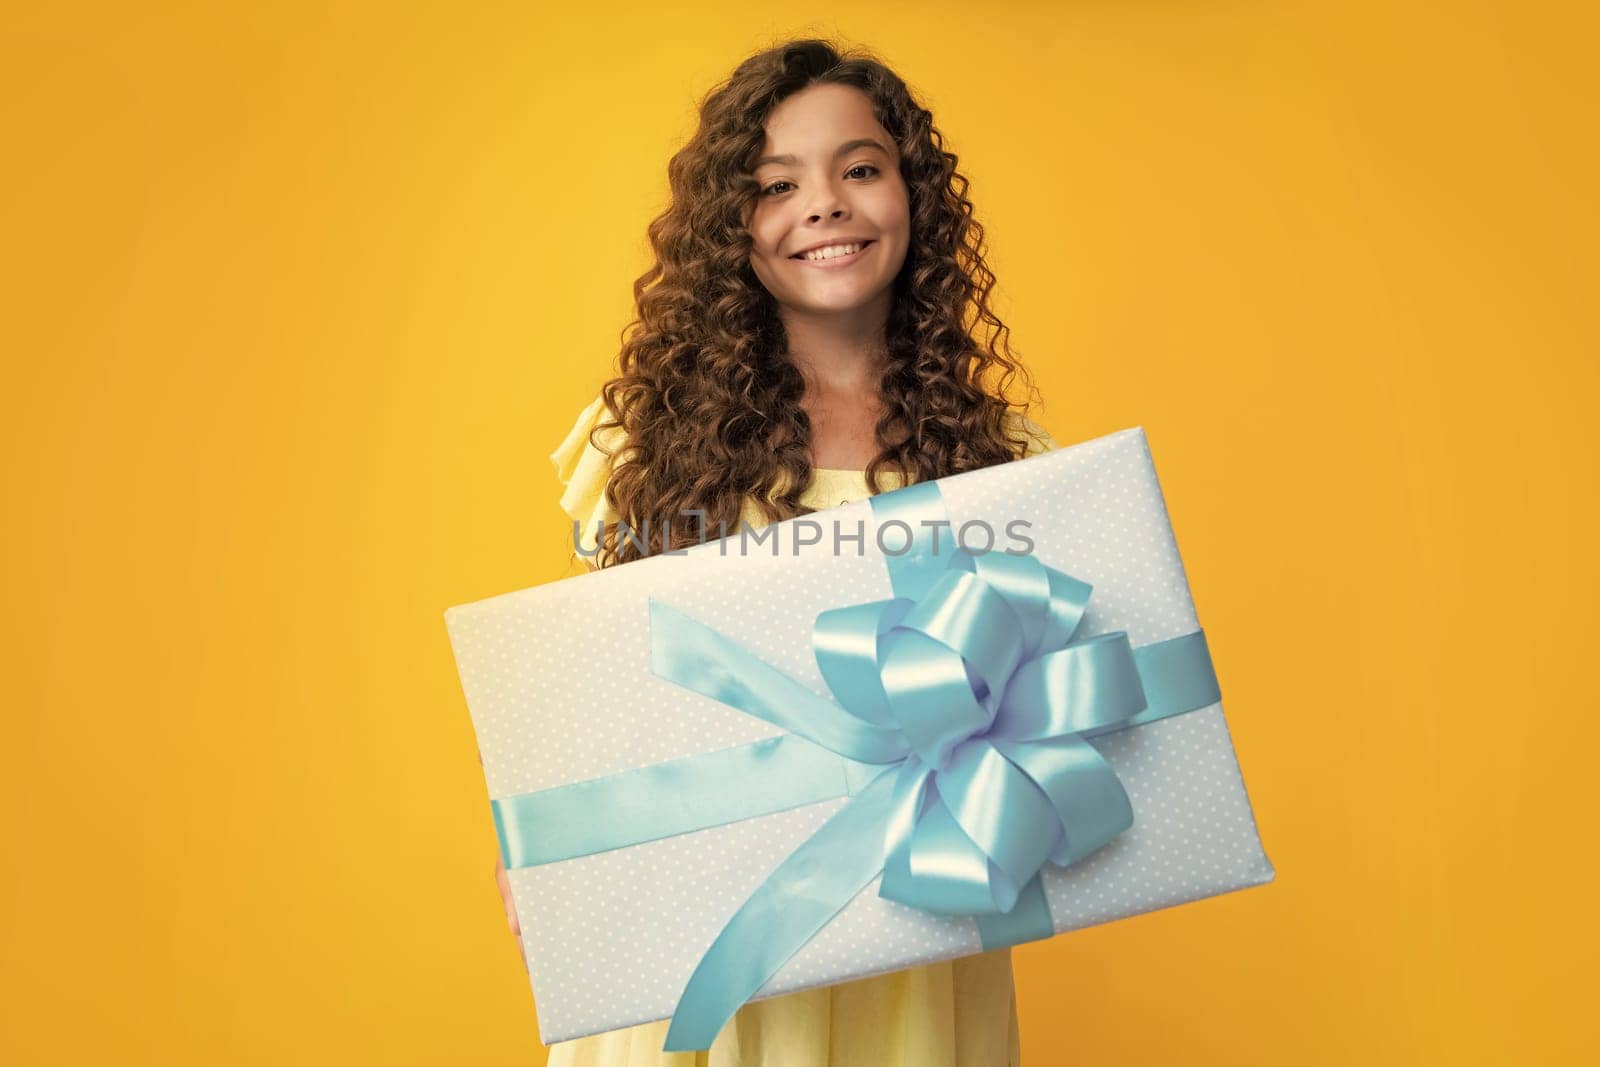 Happy teenager portrait. Child with gift present box on isolated background. Presents for birthday, Valentines day, New Year or Christmas. Smiling girl